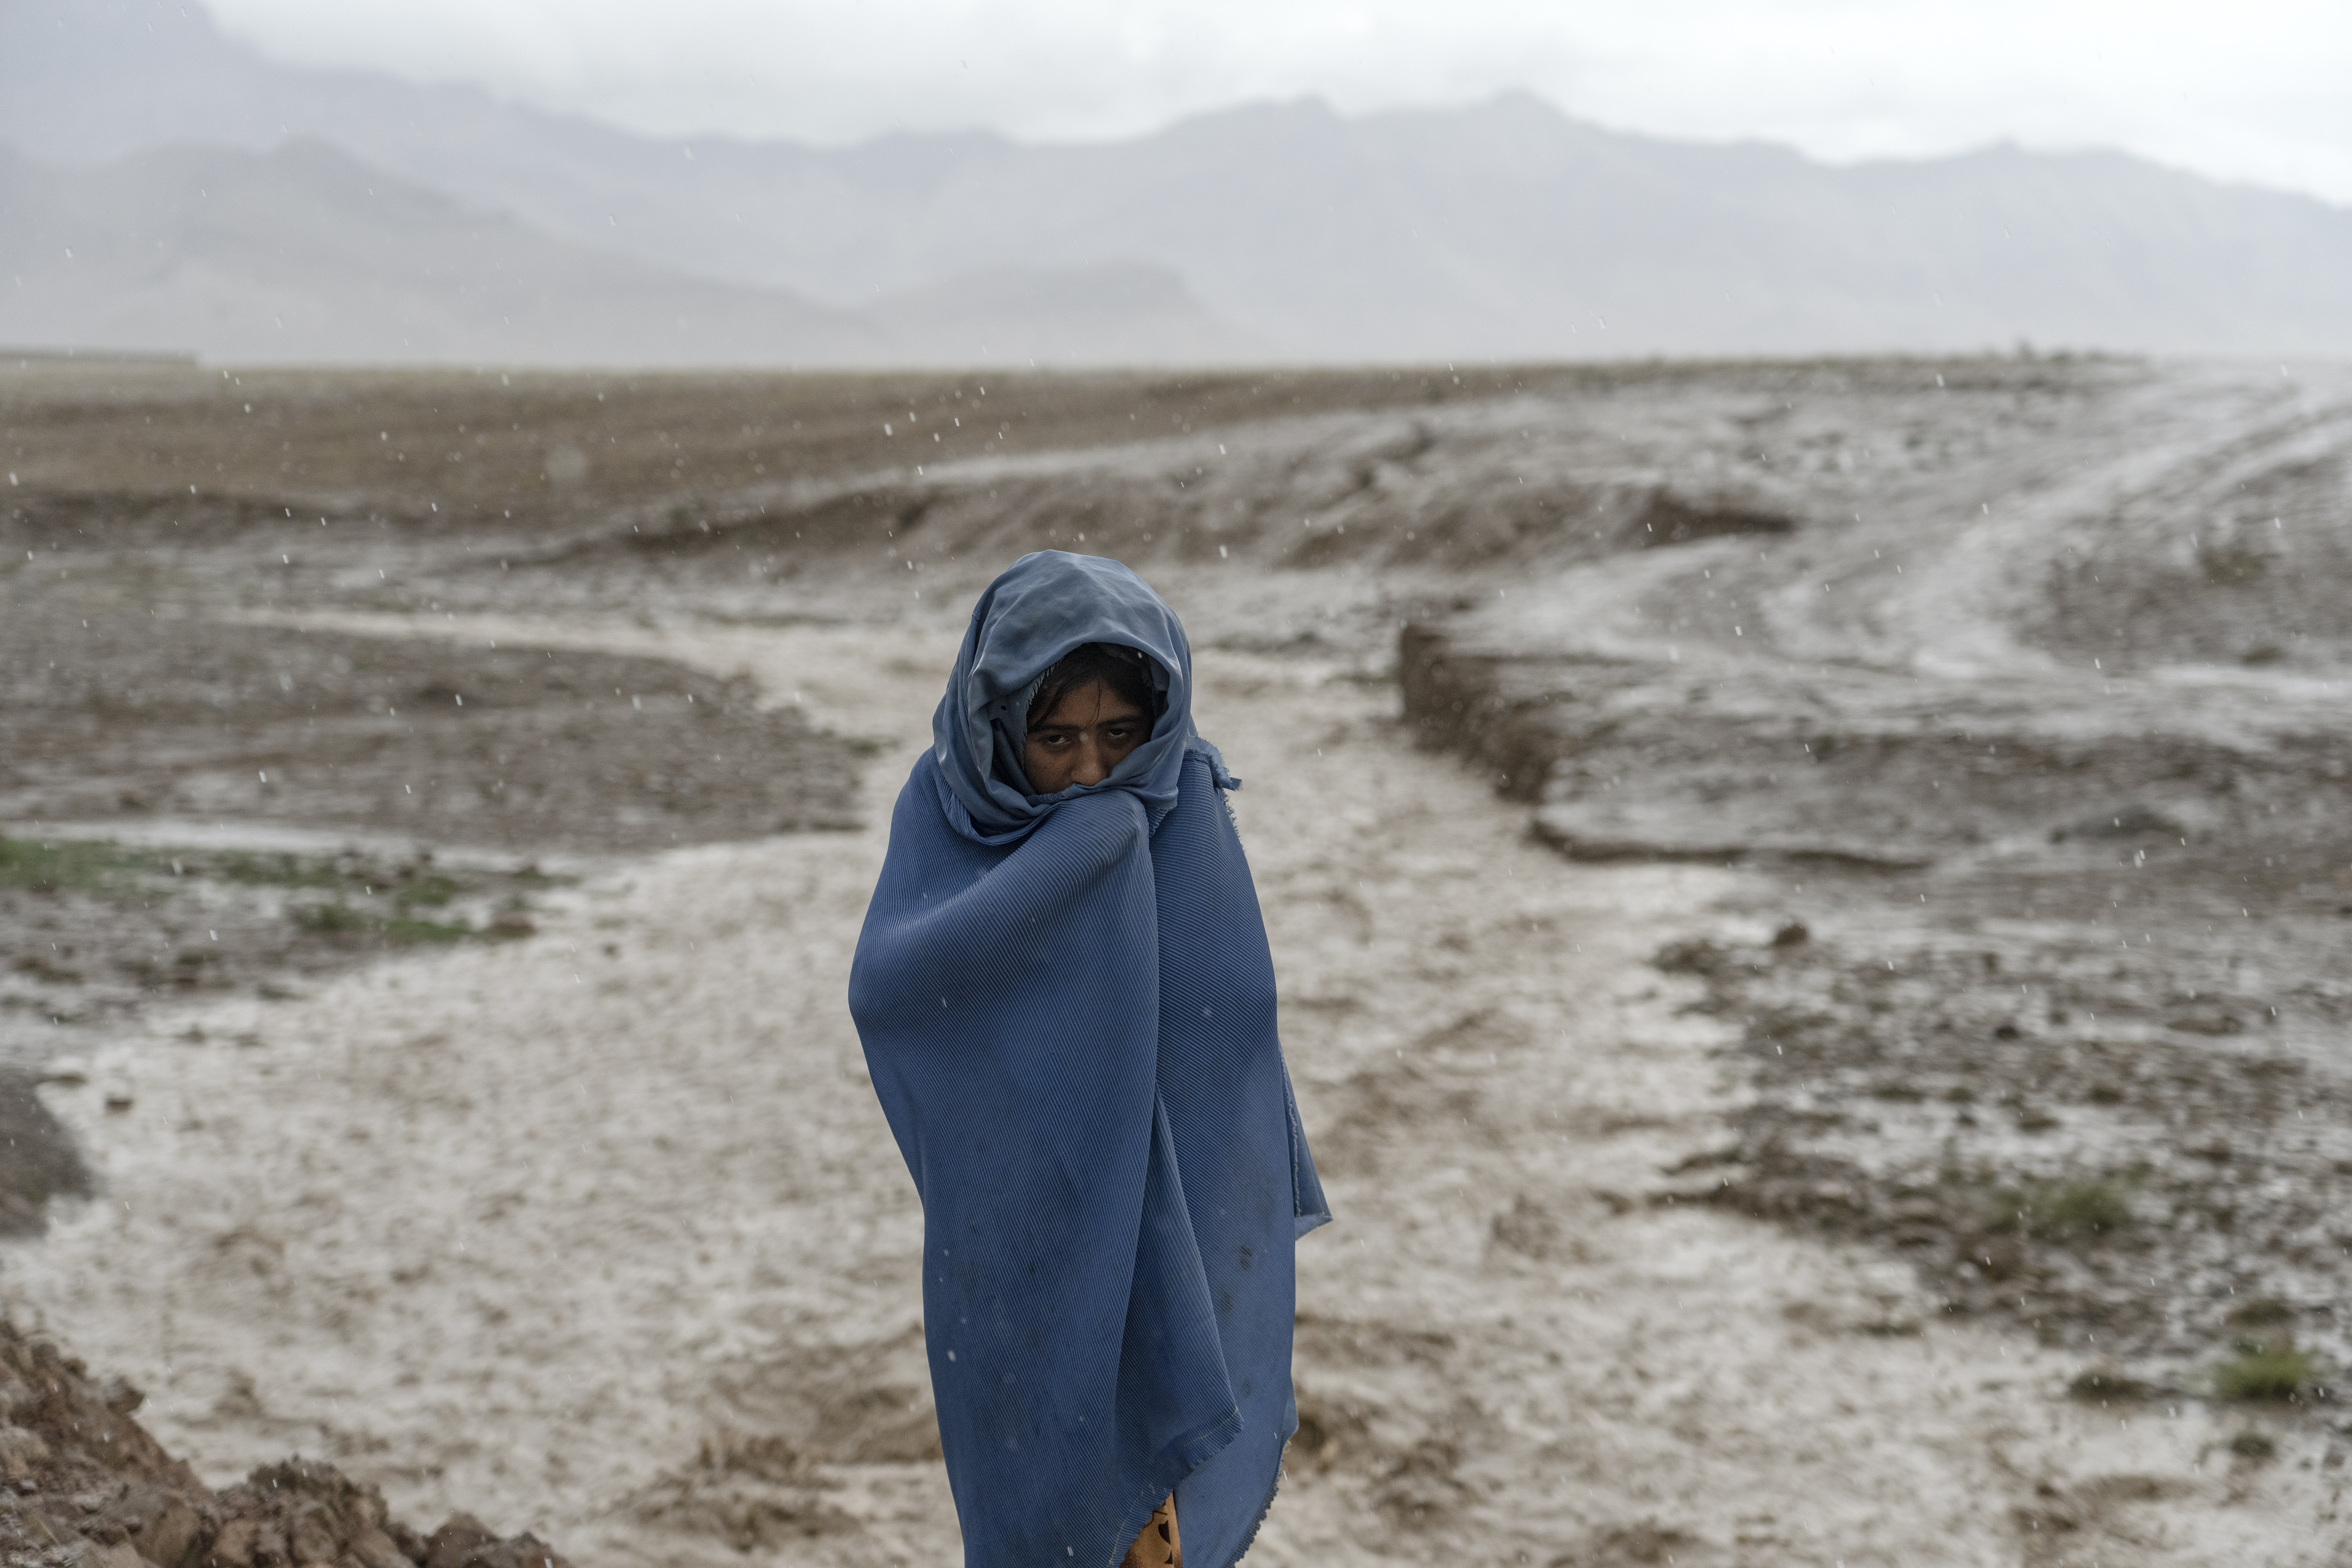 A 9-year-old Afghan girl works in the rain near a brick factory.